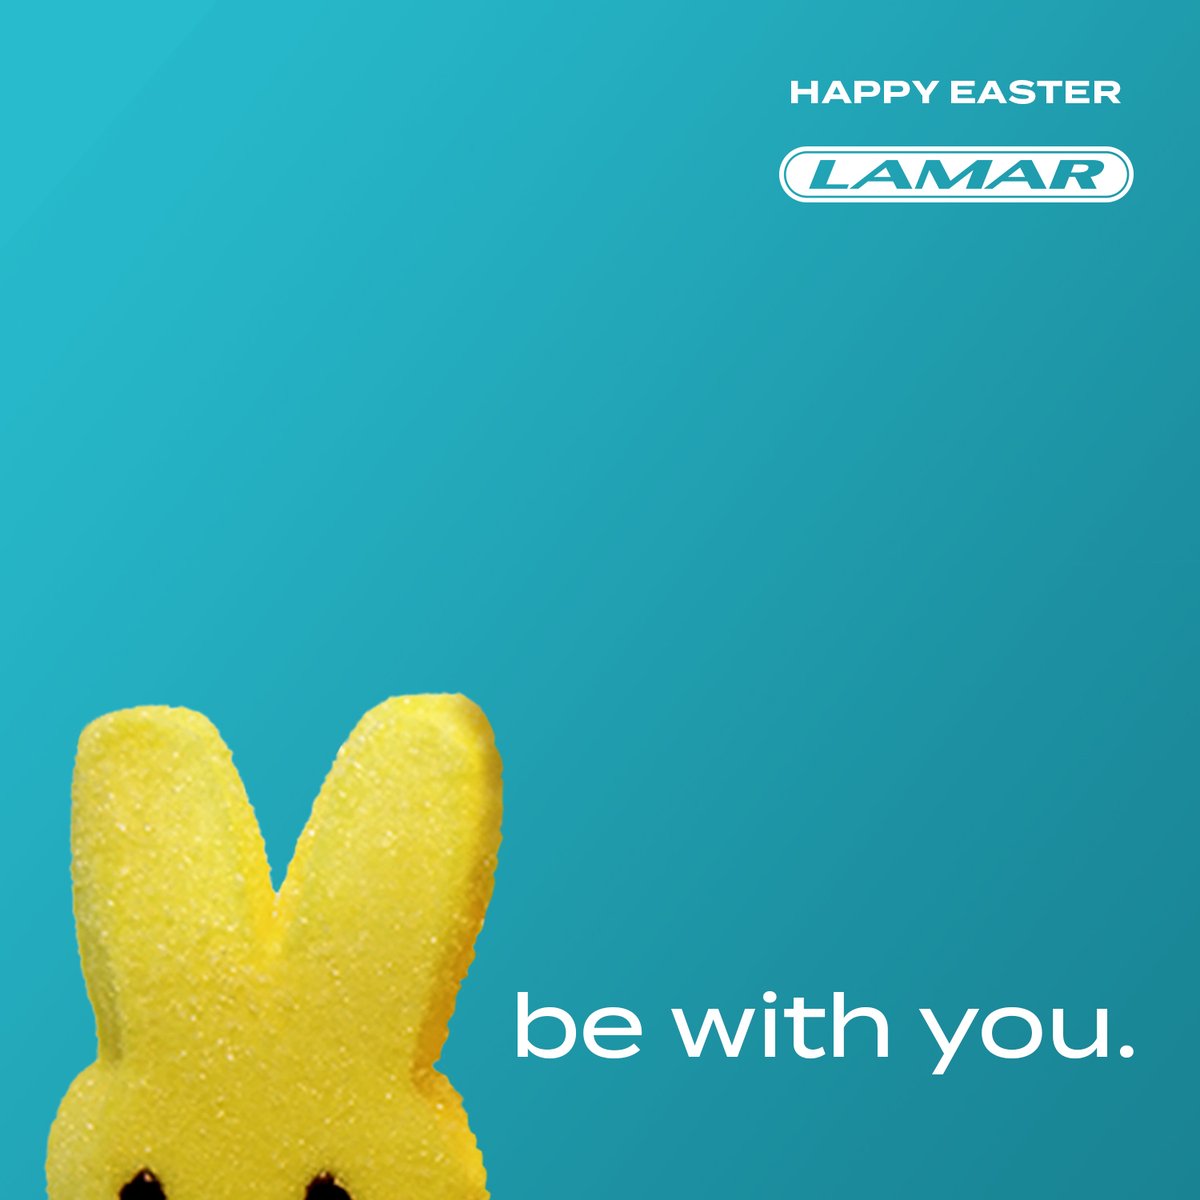 Wishing all Lamar customers, friends and families a joyous and peaceful #Easter.